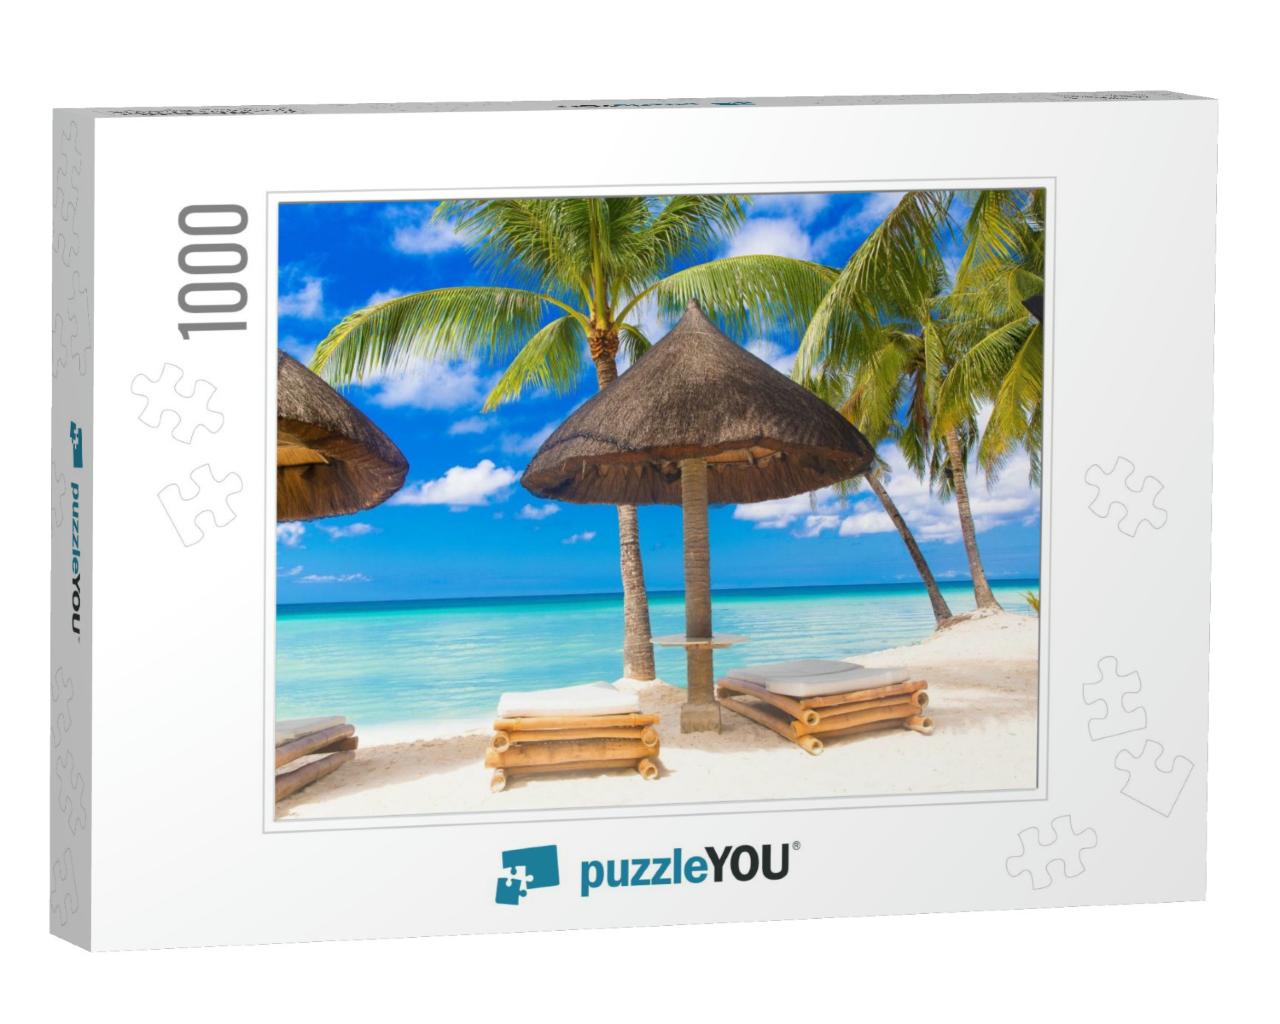 Sun Umbrella & Beach Beds Under the Palm Trees on Tropica... Jigsaw Puzzle with 1000 pieces